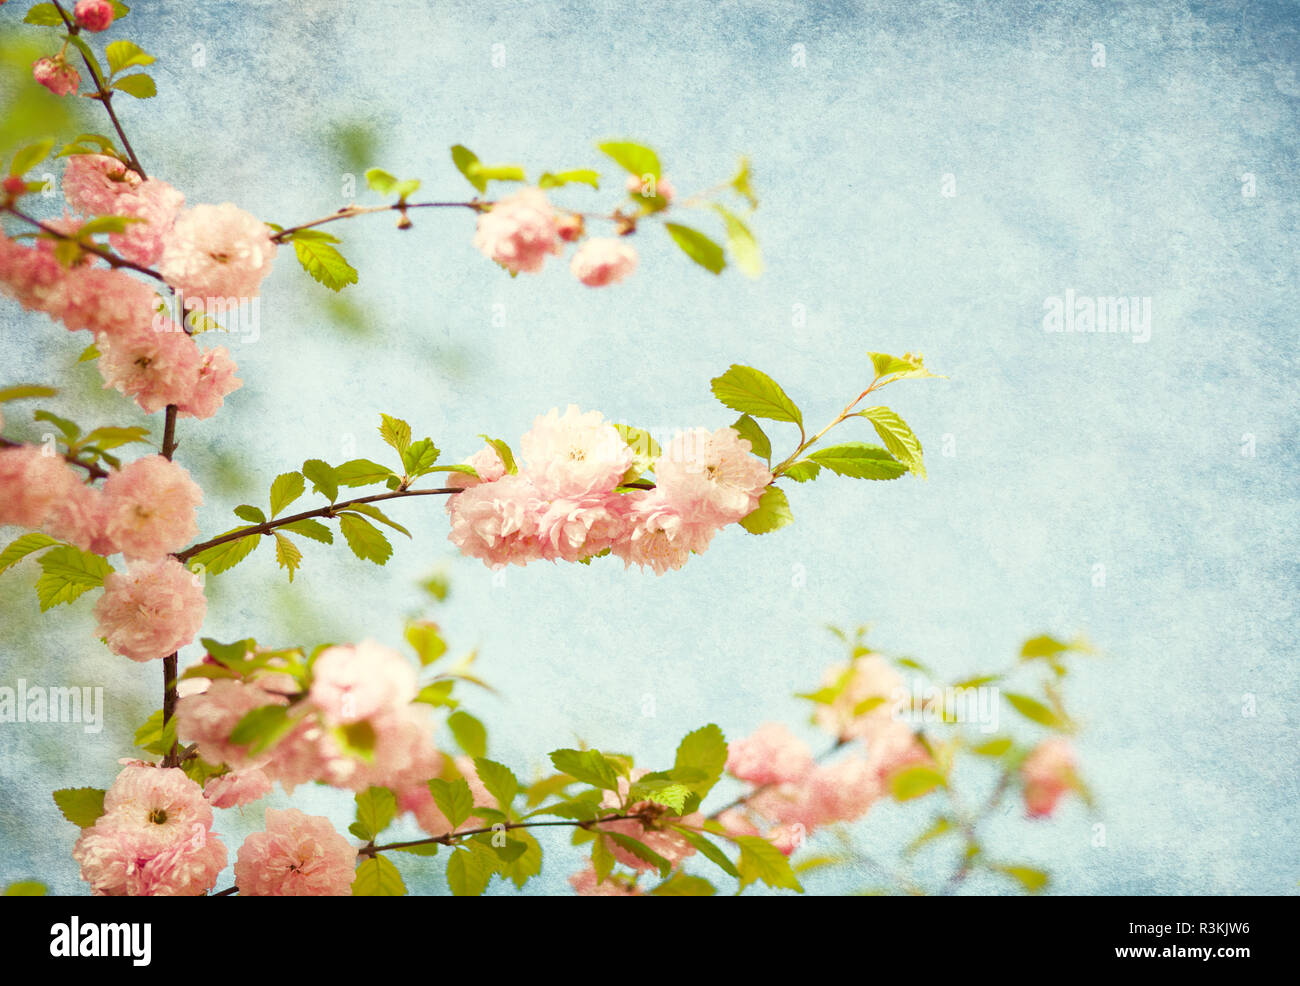 branches with beautiful pink flowers against the blue sky. Amygdalus triloba. Added paper texture. Stock Photo